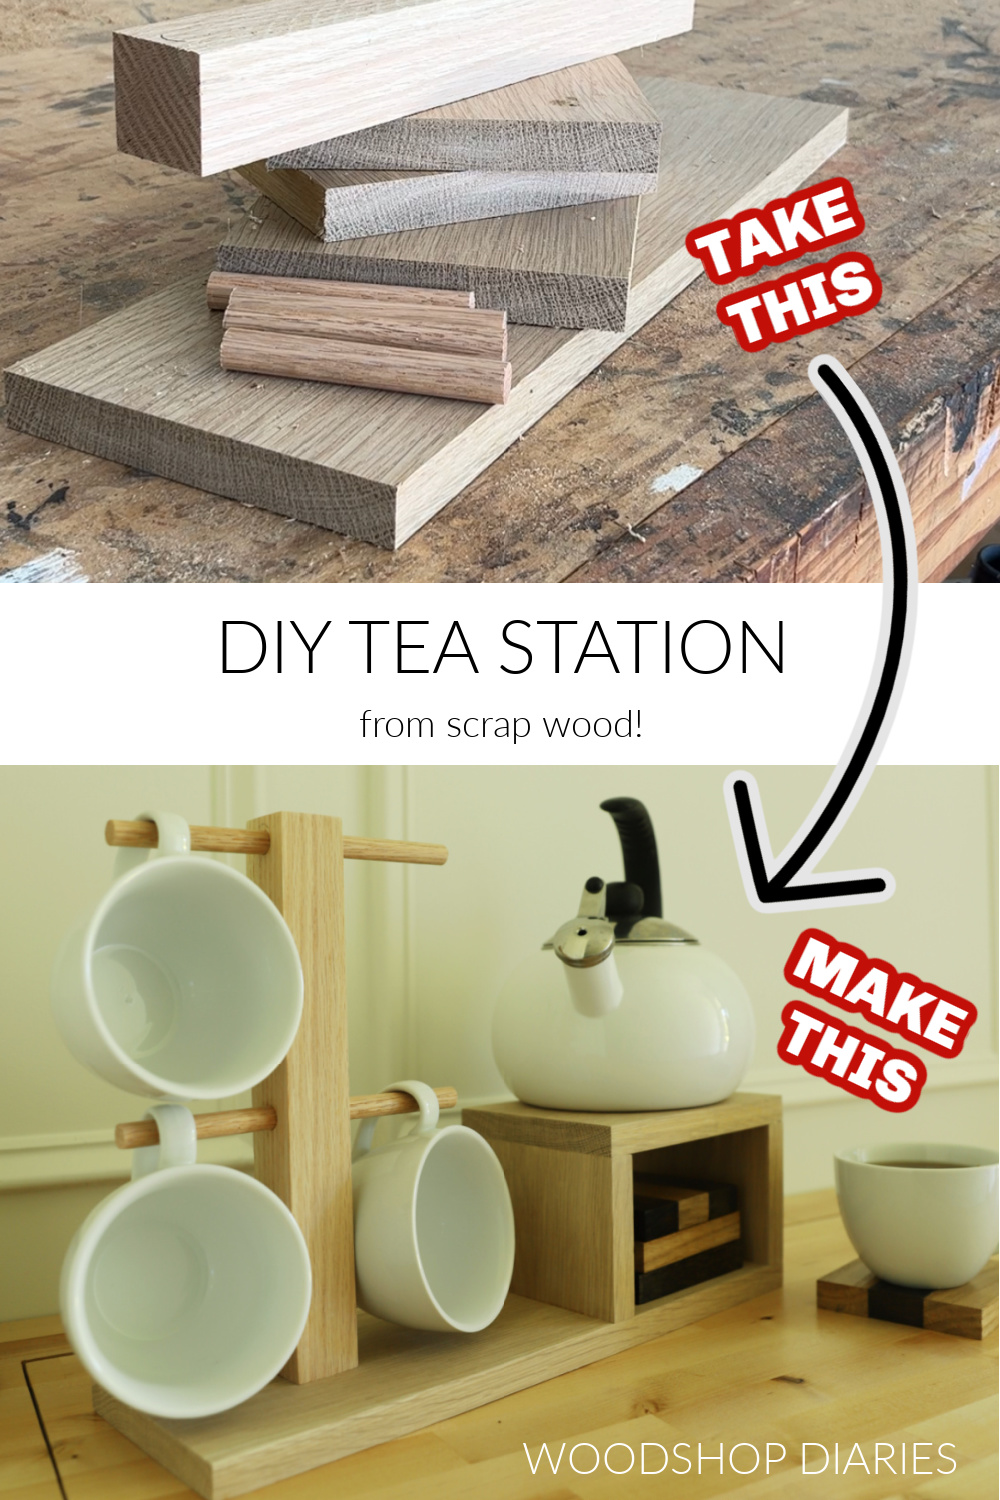 Pinterest collage image showing scrap oak boards cut on workbench at top and assembled DIY tea station tray at bottom with text "DIY tea station from scrap wood!"